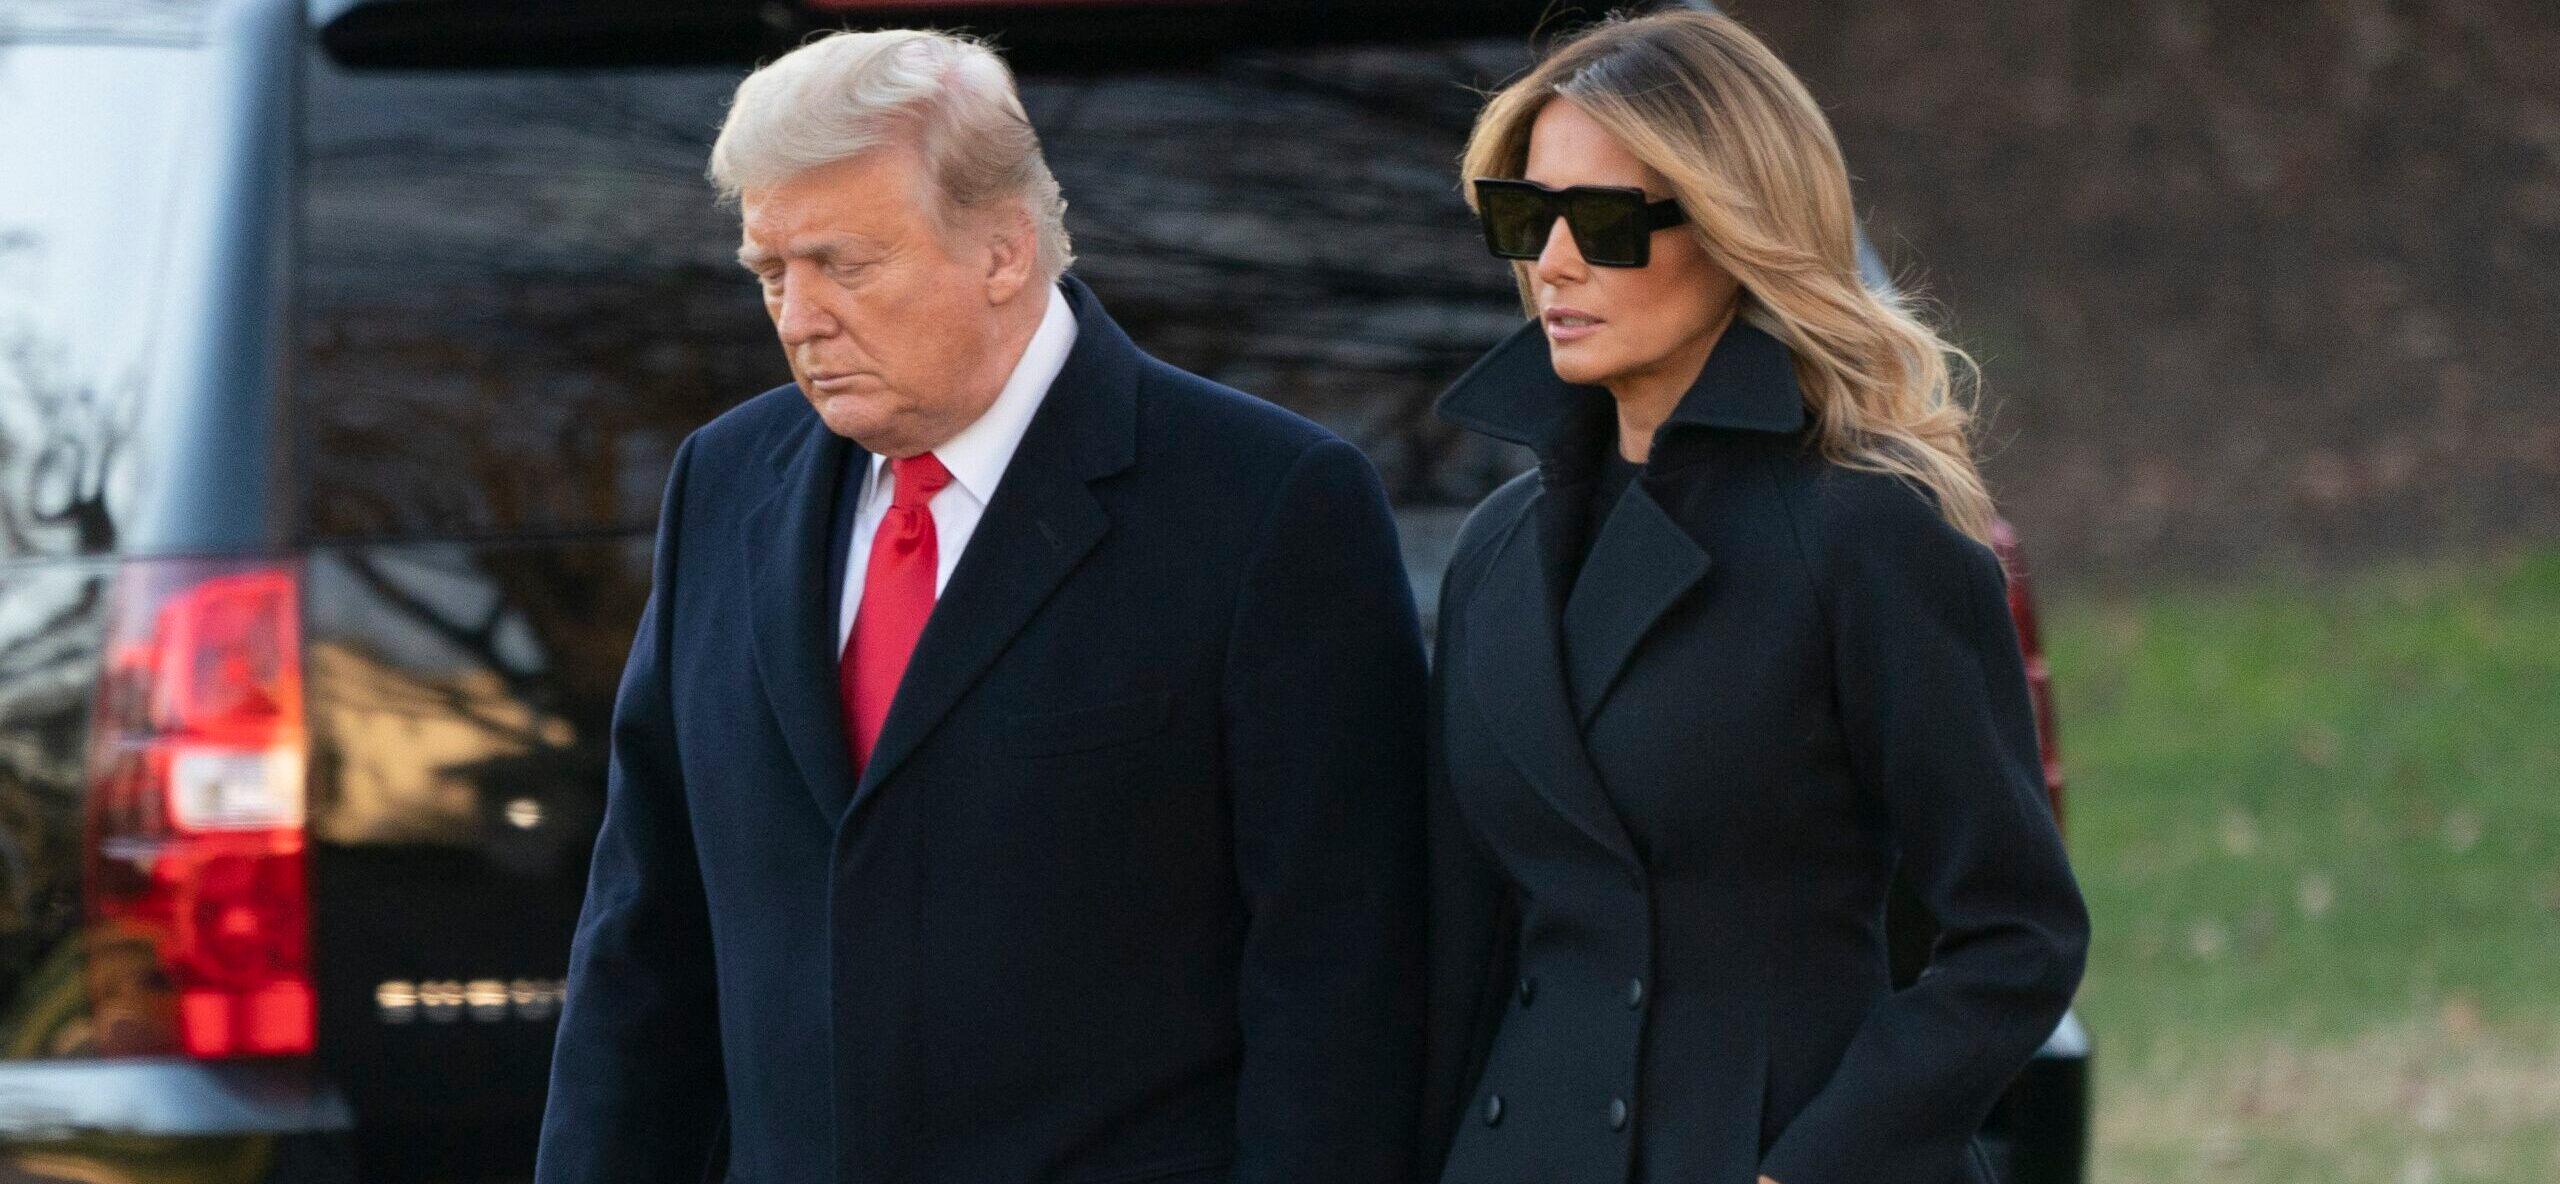 Melania Trump Is ‘Not Happy’ Hearing ‘New Details’ In Husband’s Hush Money Trial, Ex-Aide Claims